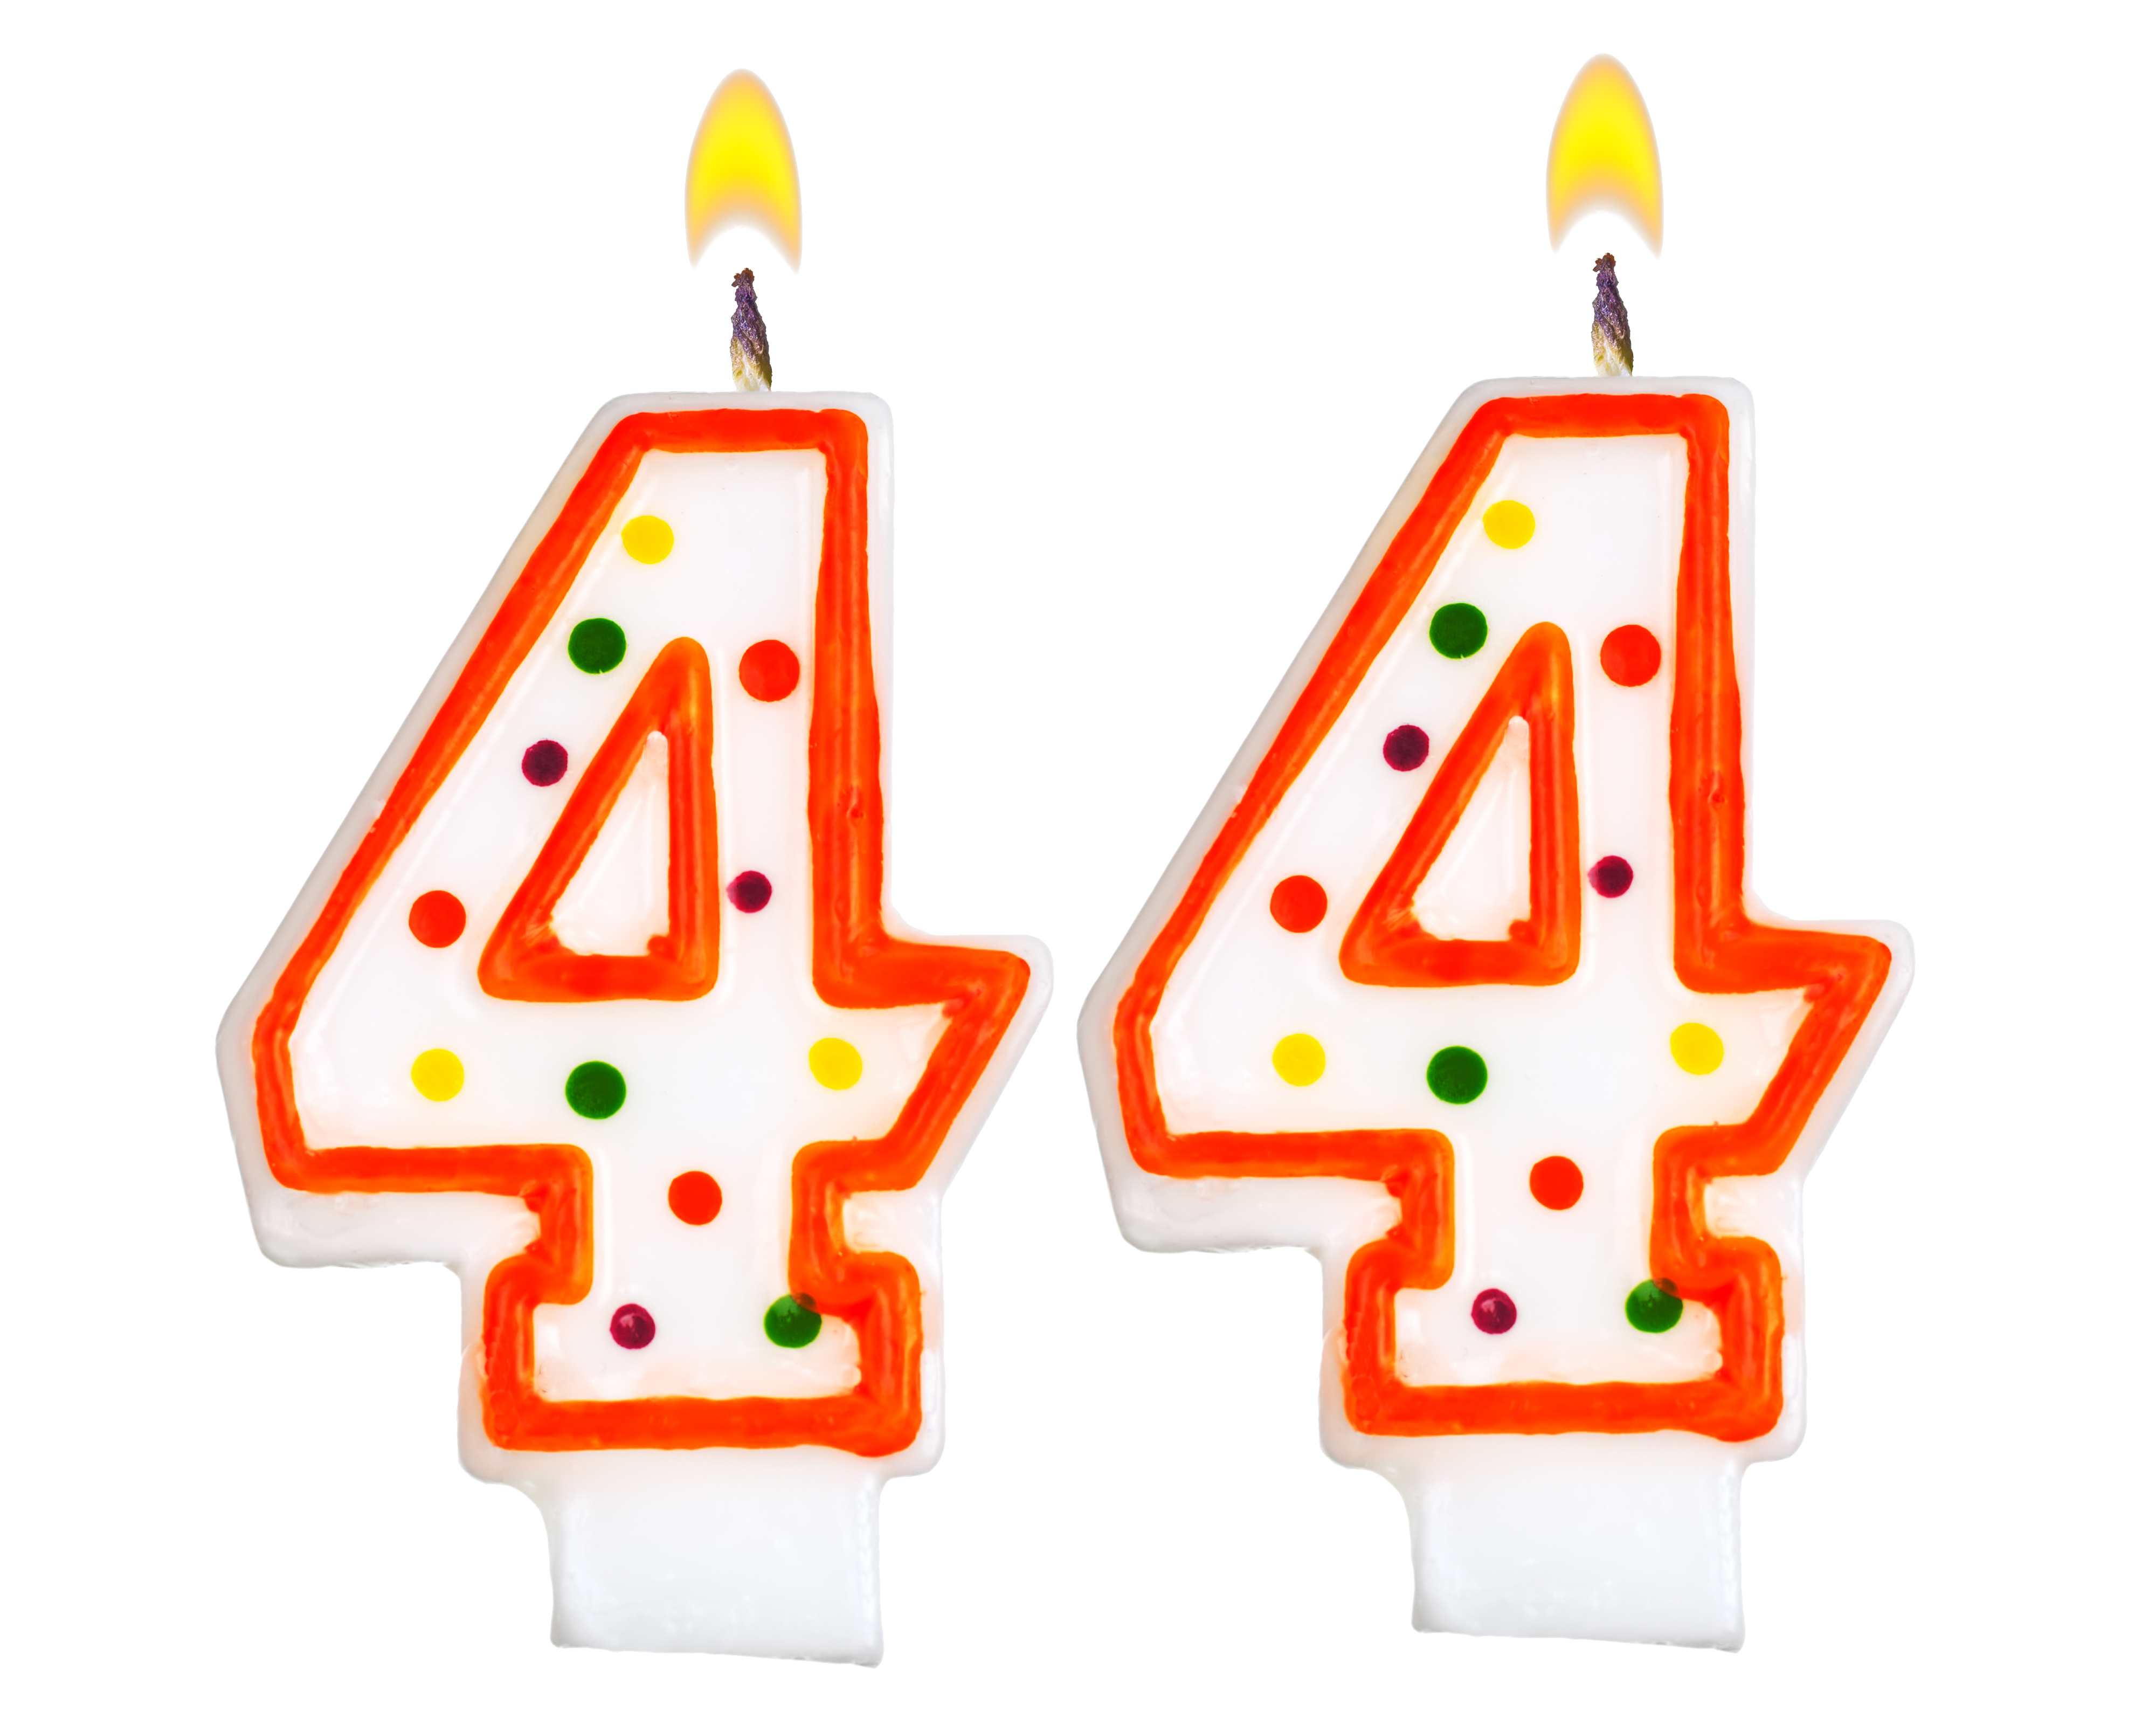 44 Is Here: It's My Magical Birthday! - Liis Windischmann's Official Website